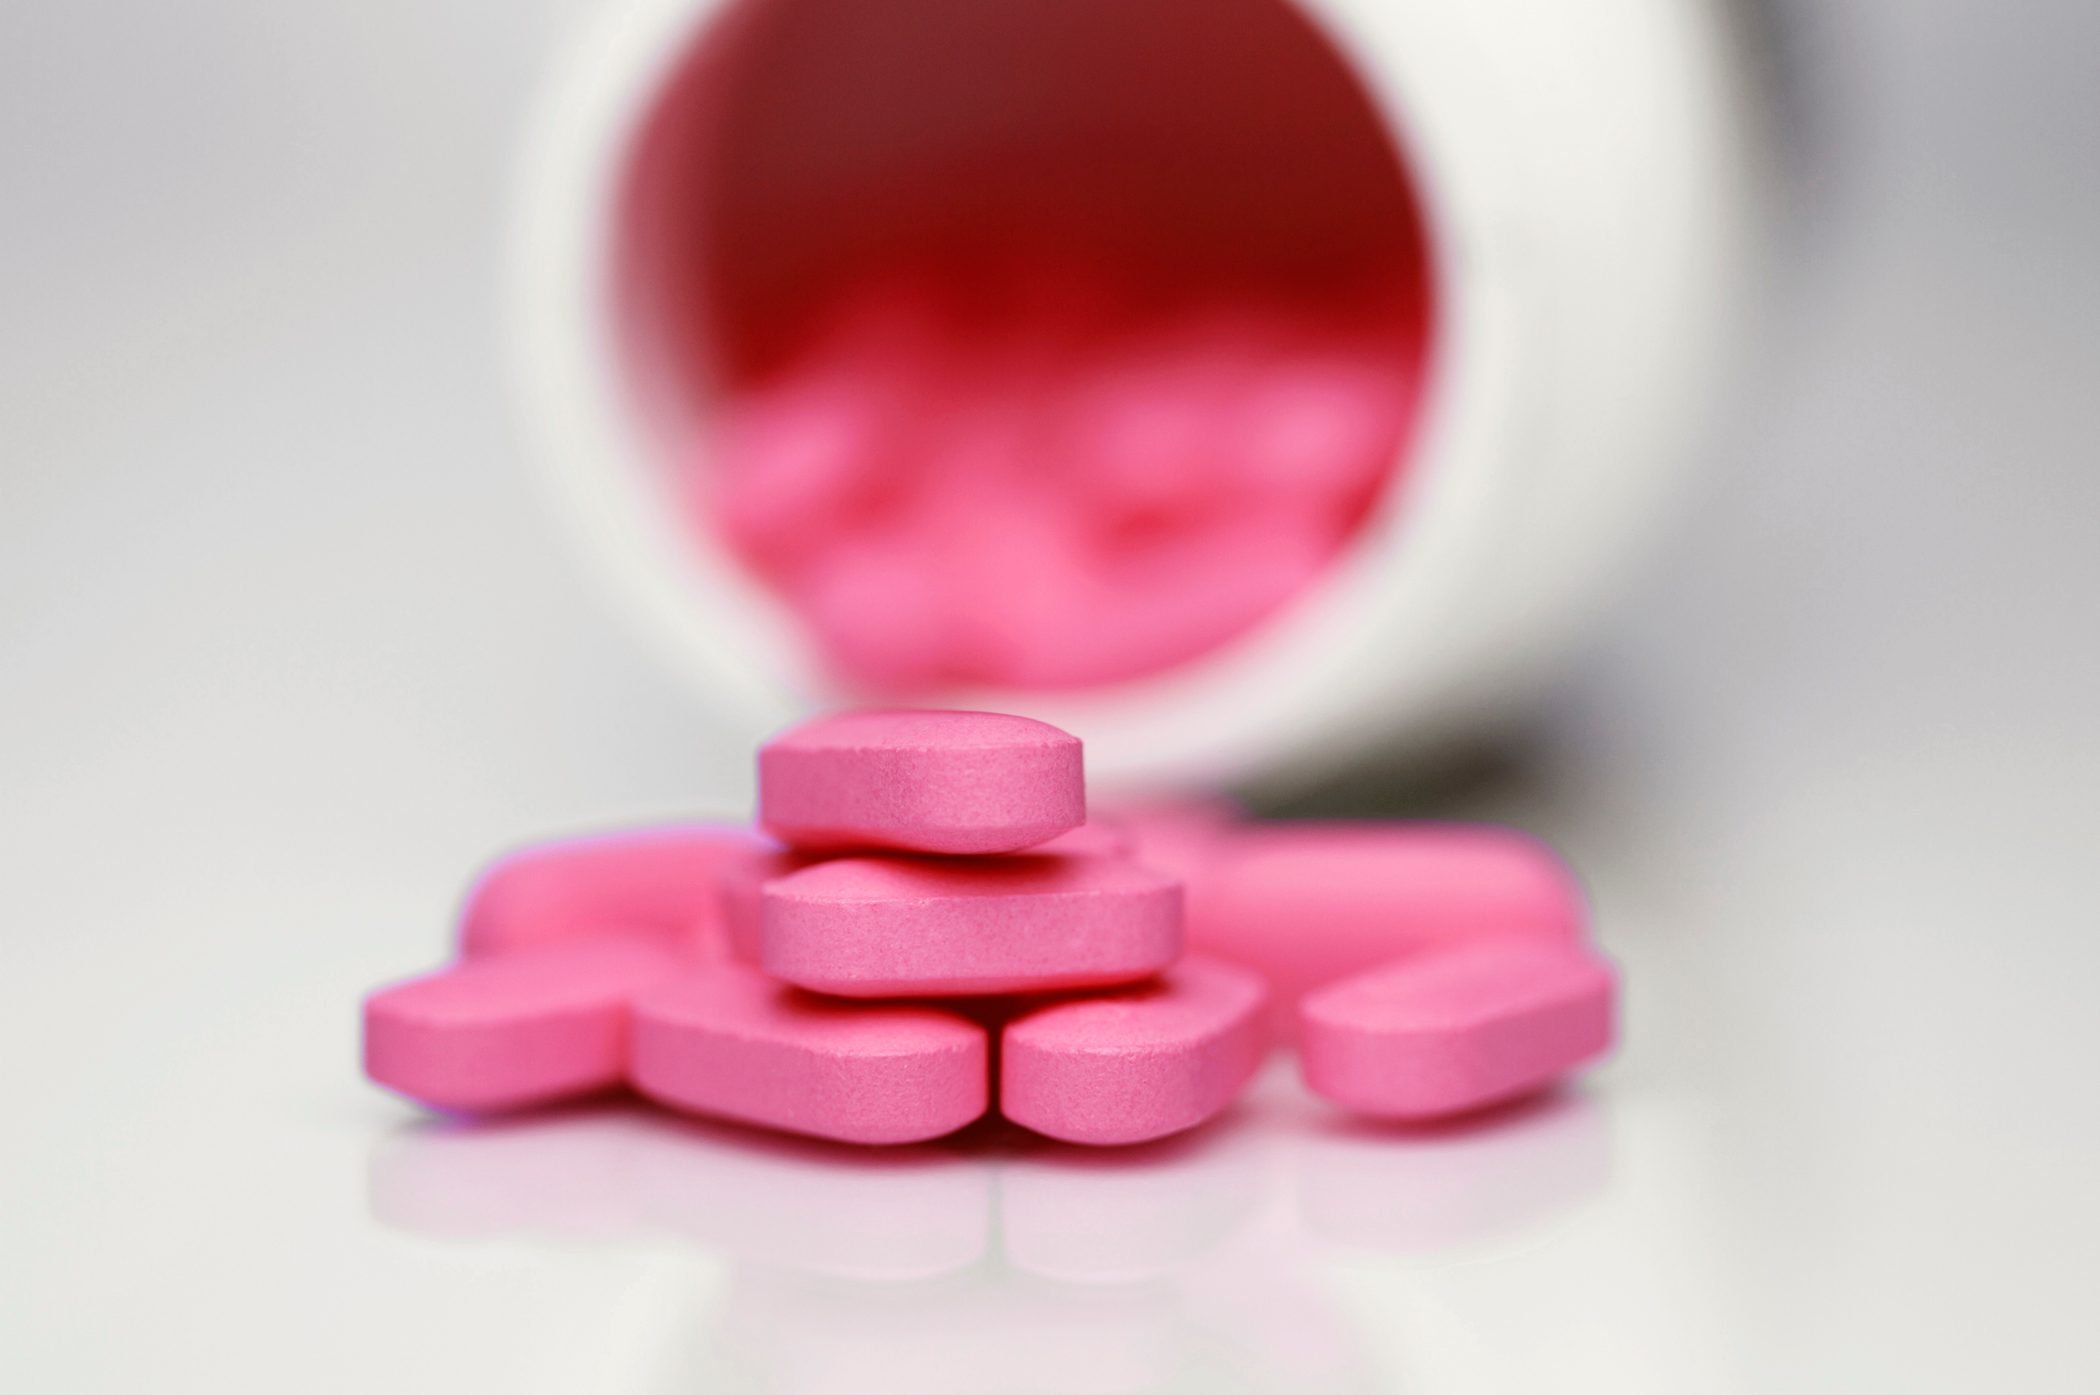 Can You Overdose on Benadryl? Heres What Experts Say The Healthy pic